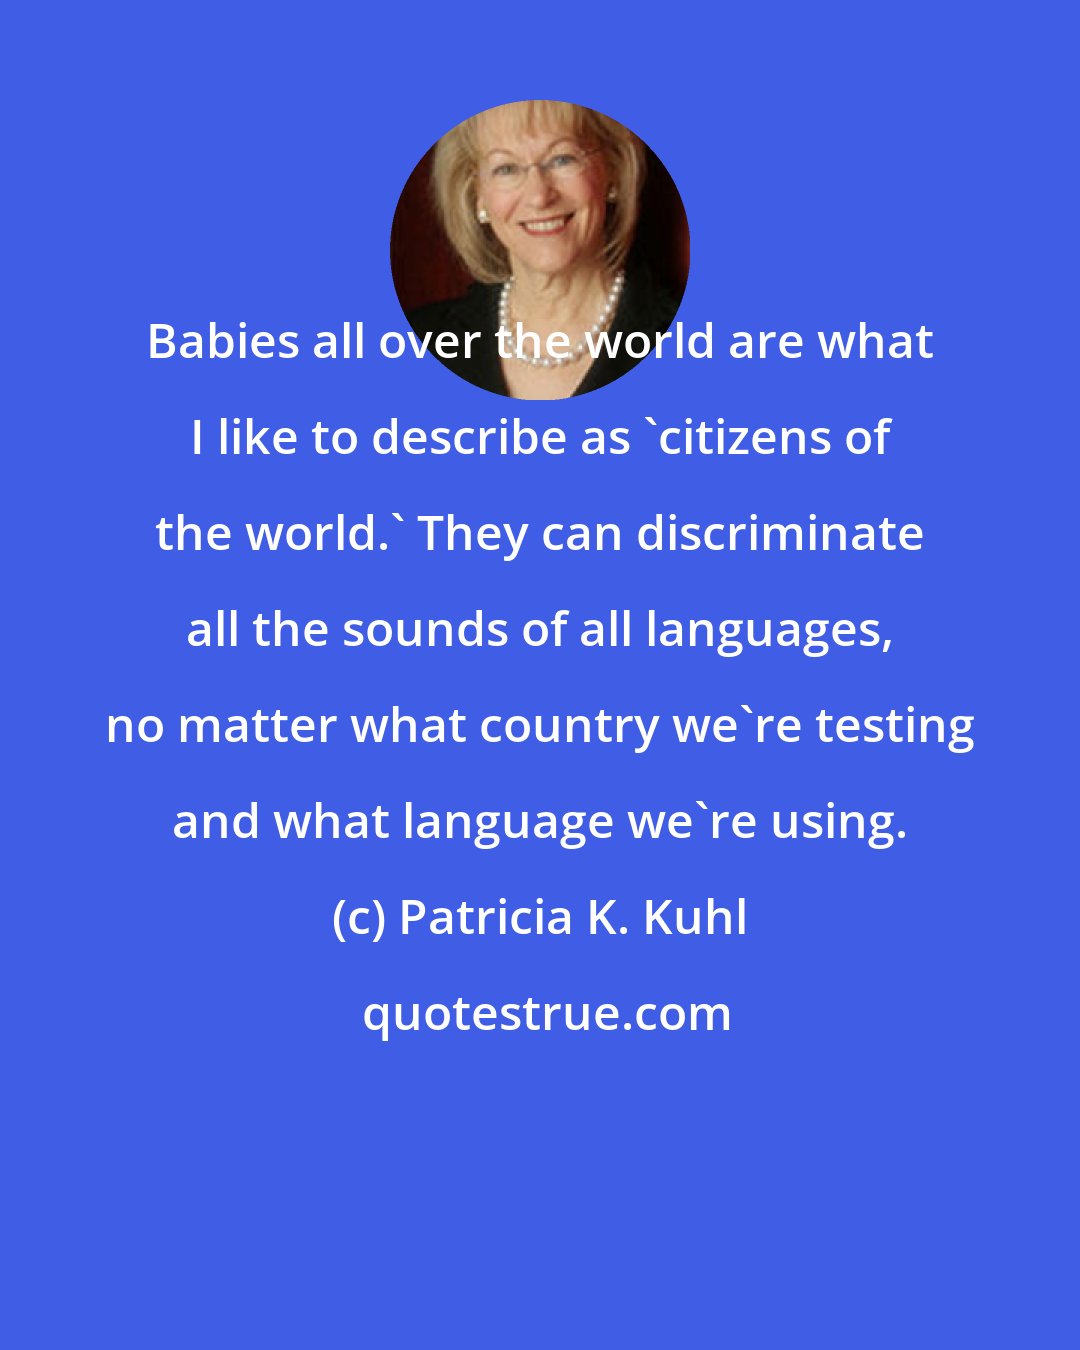 Patricia K. Kuhl: Babies all over the world are what I like to describe as 'citizens of the world.' They can discriminate all the sounds of all languages, no matter what country we're testing and what language we're using.